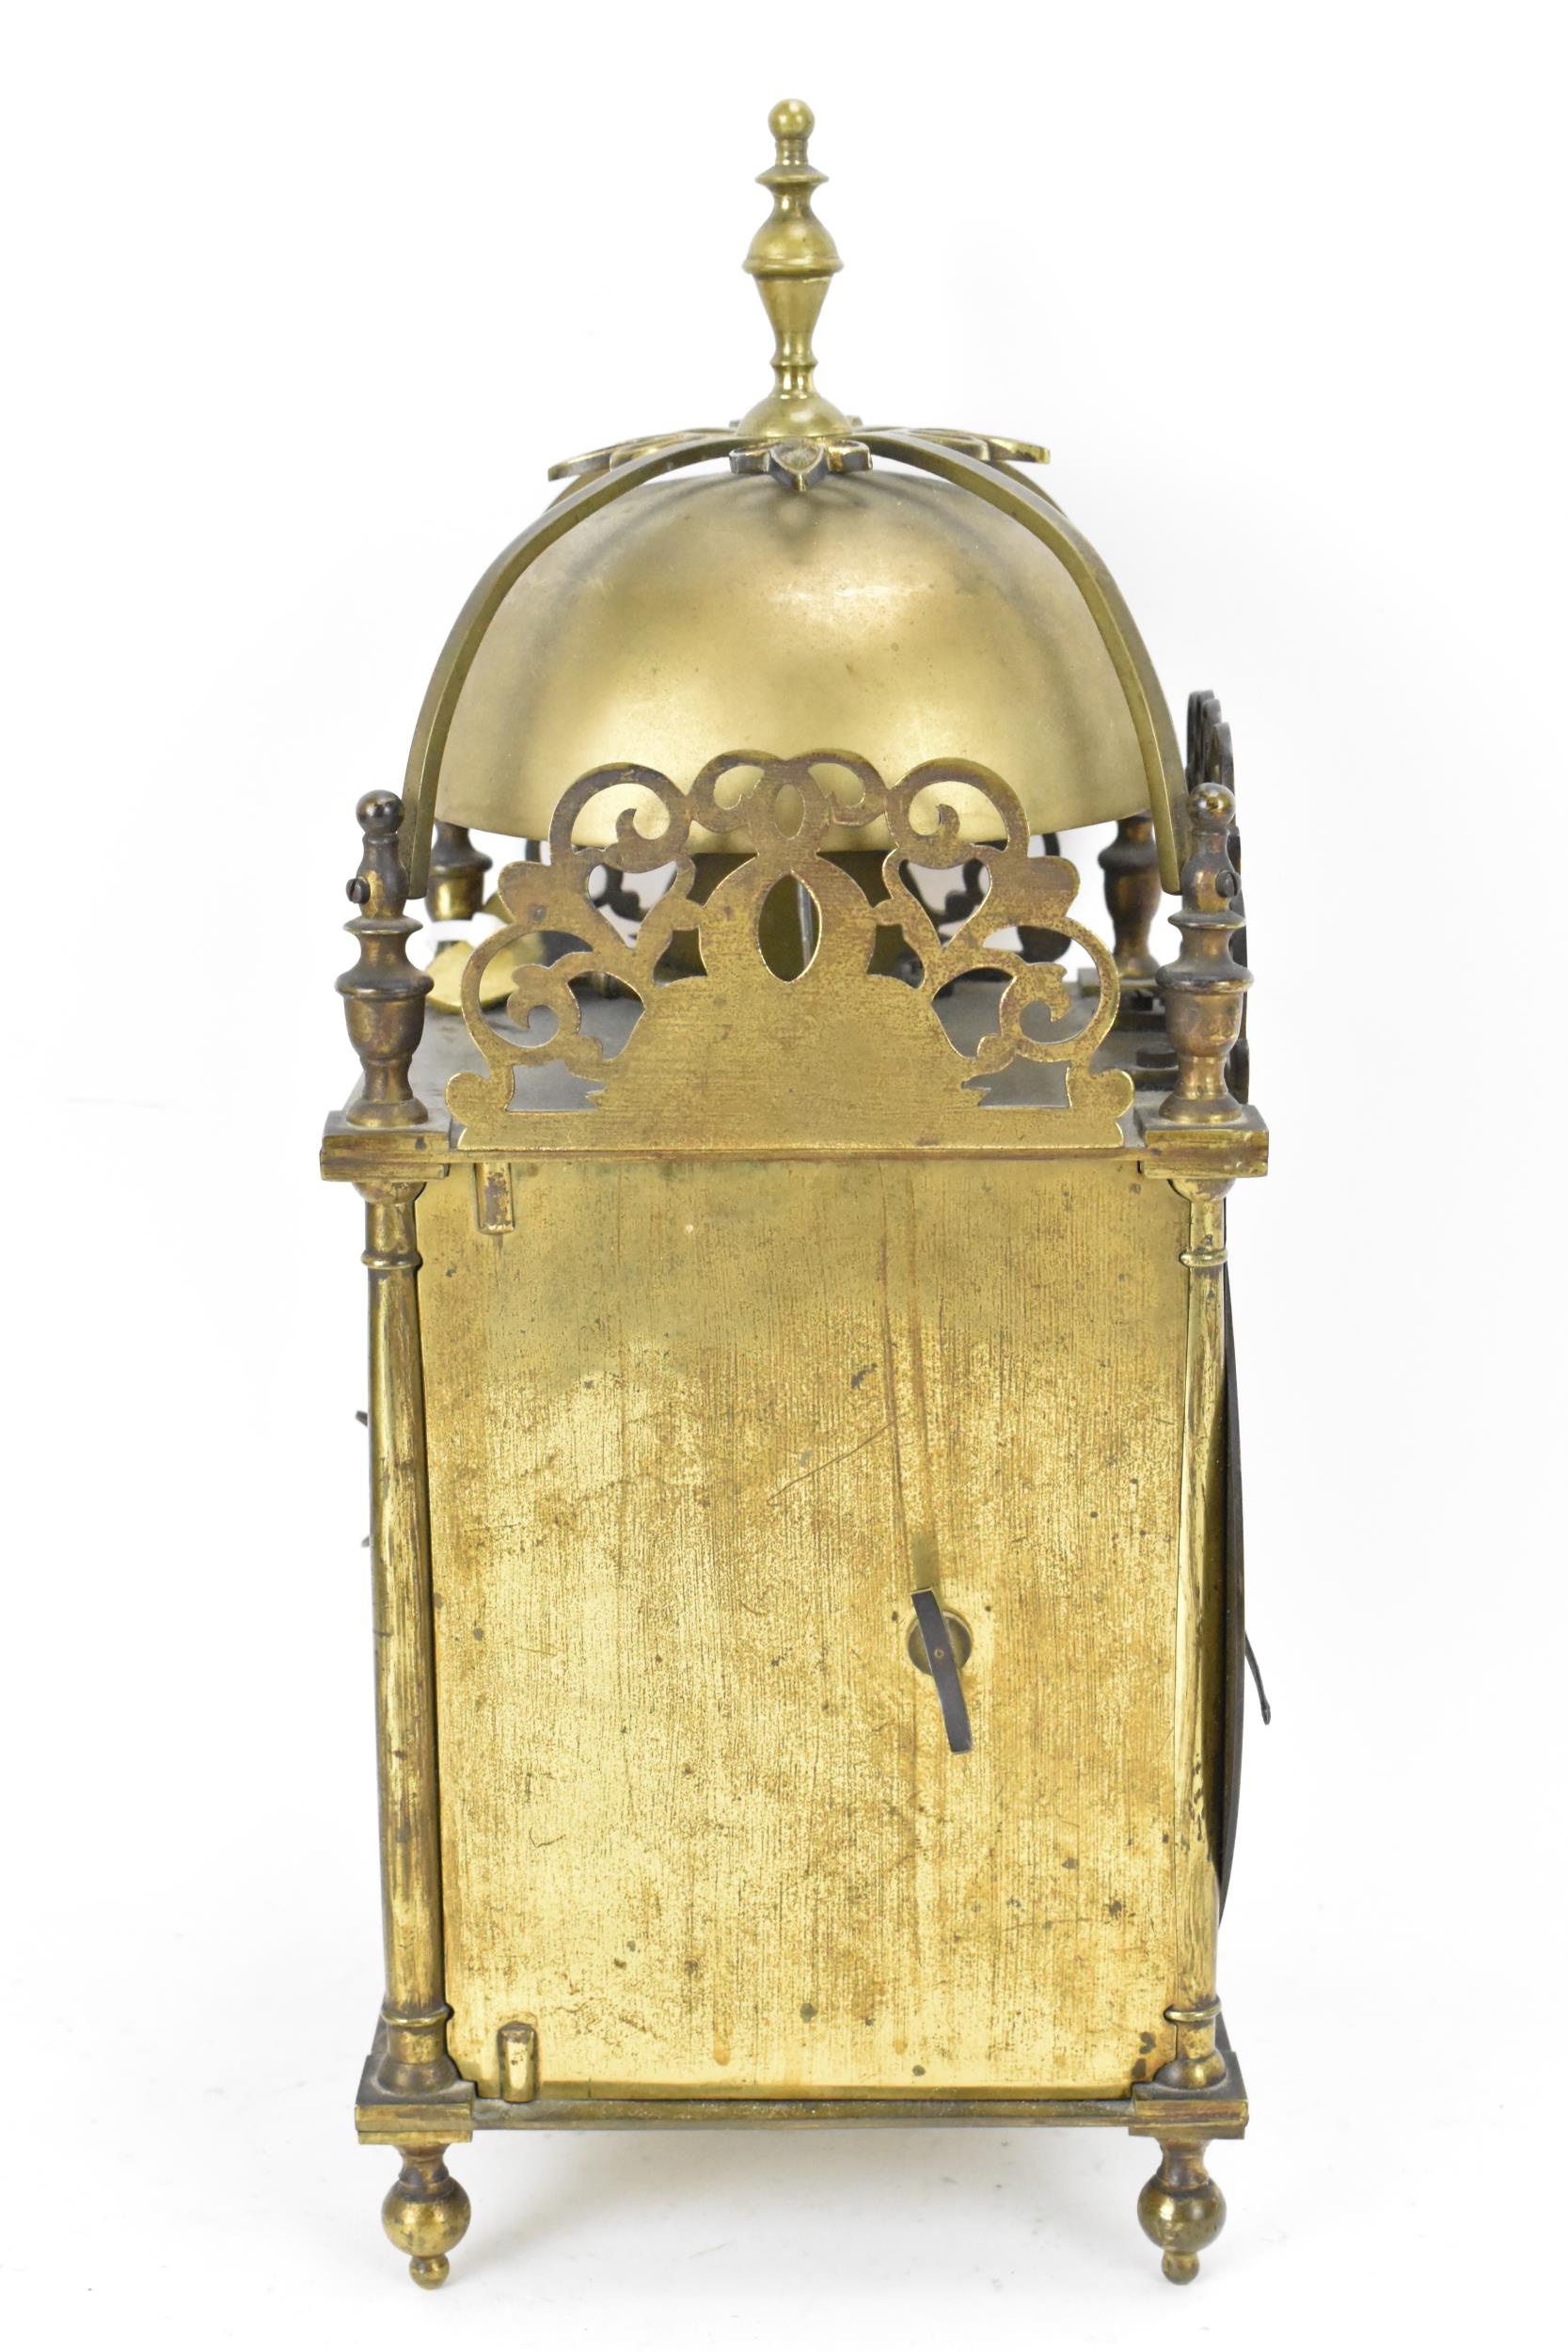 A circa 1900 Mappin & Webb lantern clock, in the 17th century style, the brass case having a - Image 4 of 5